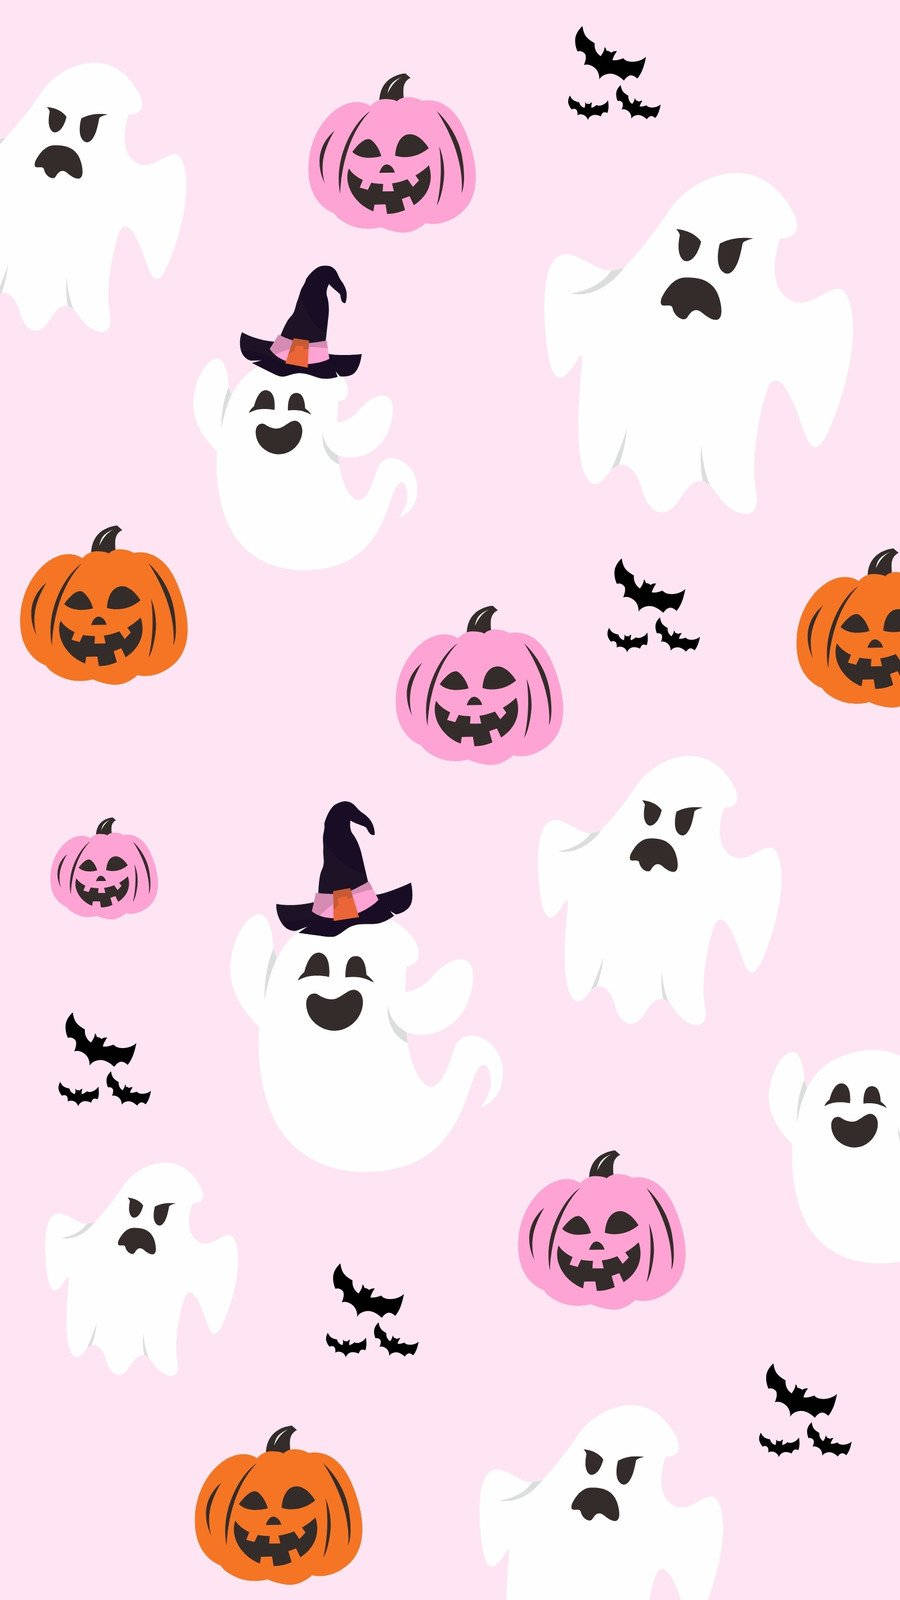 "Stay connected this Halloween with this cute phone!" Wallpaper